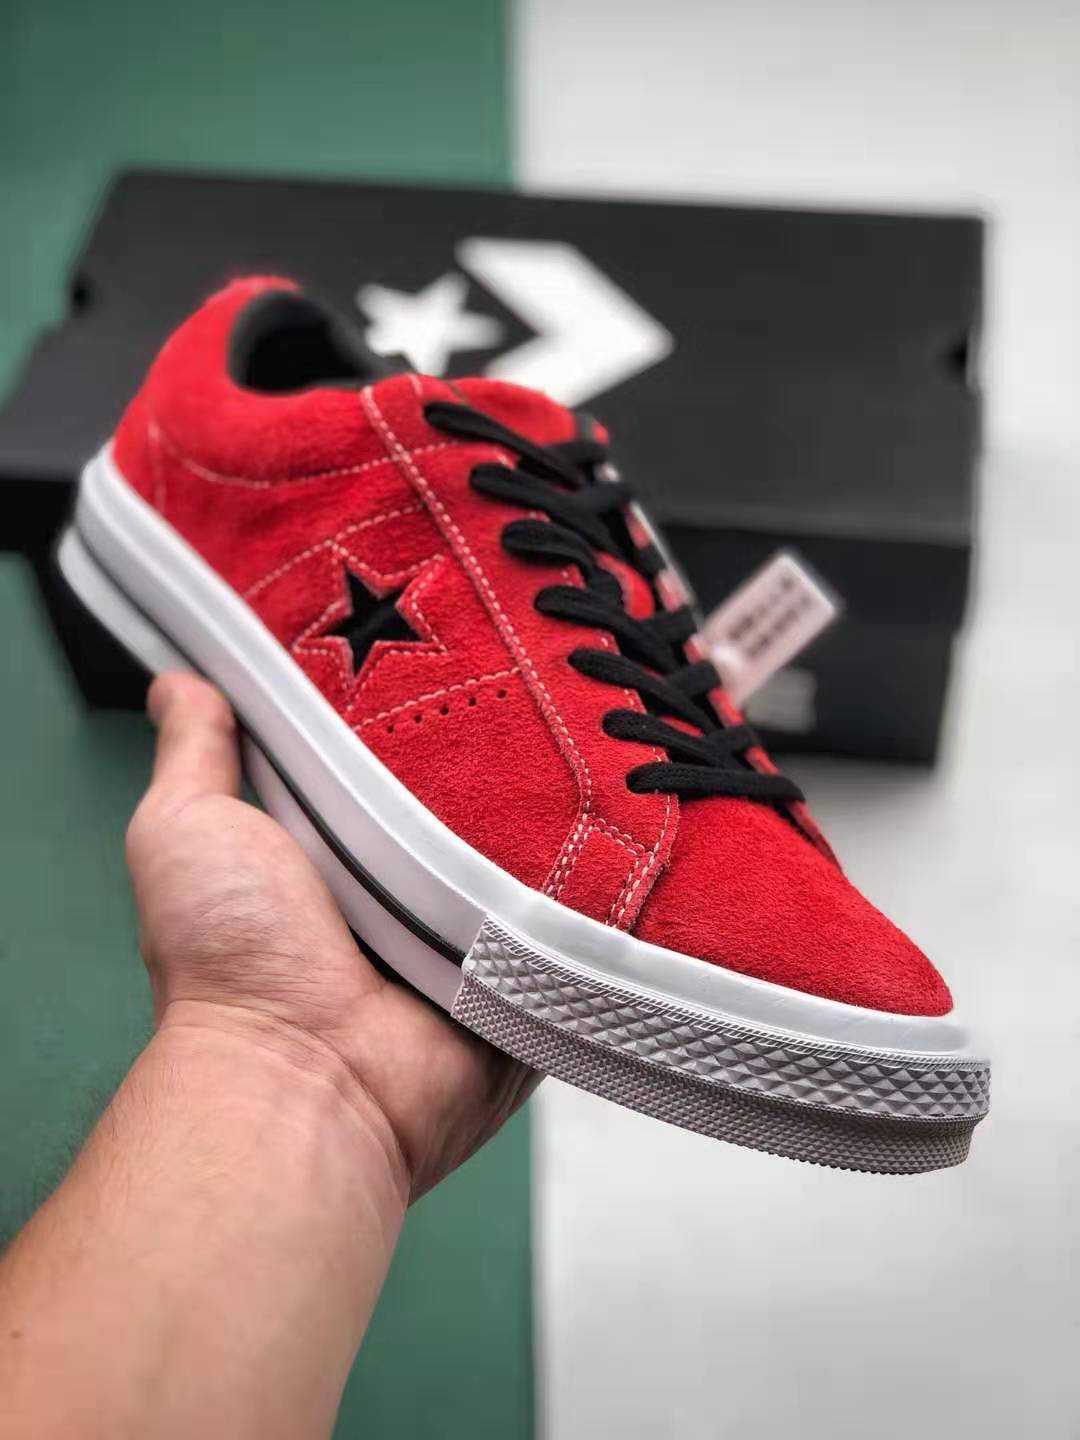 Converse One Star 'Red' 163246C - Classic Style and Bold Color for Any Occasion